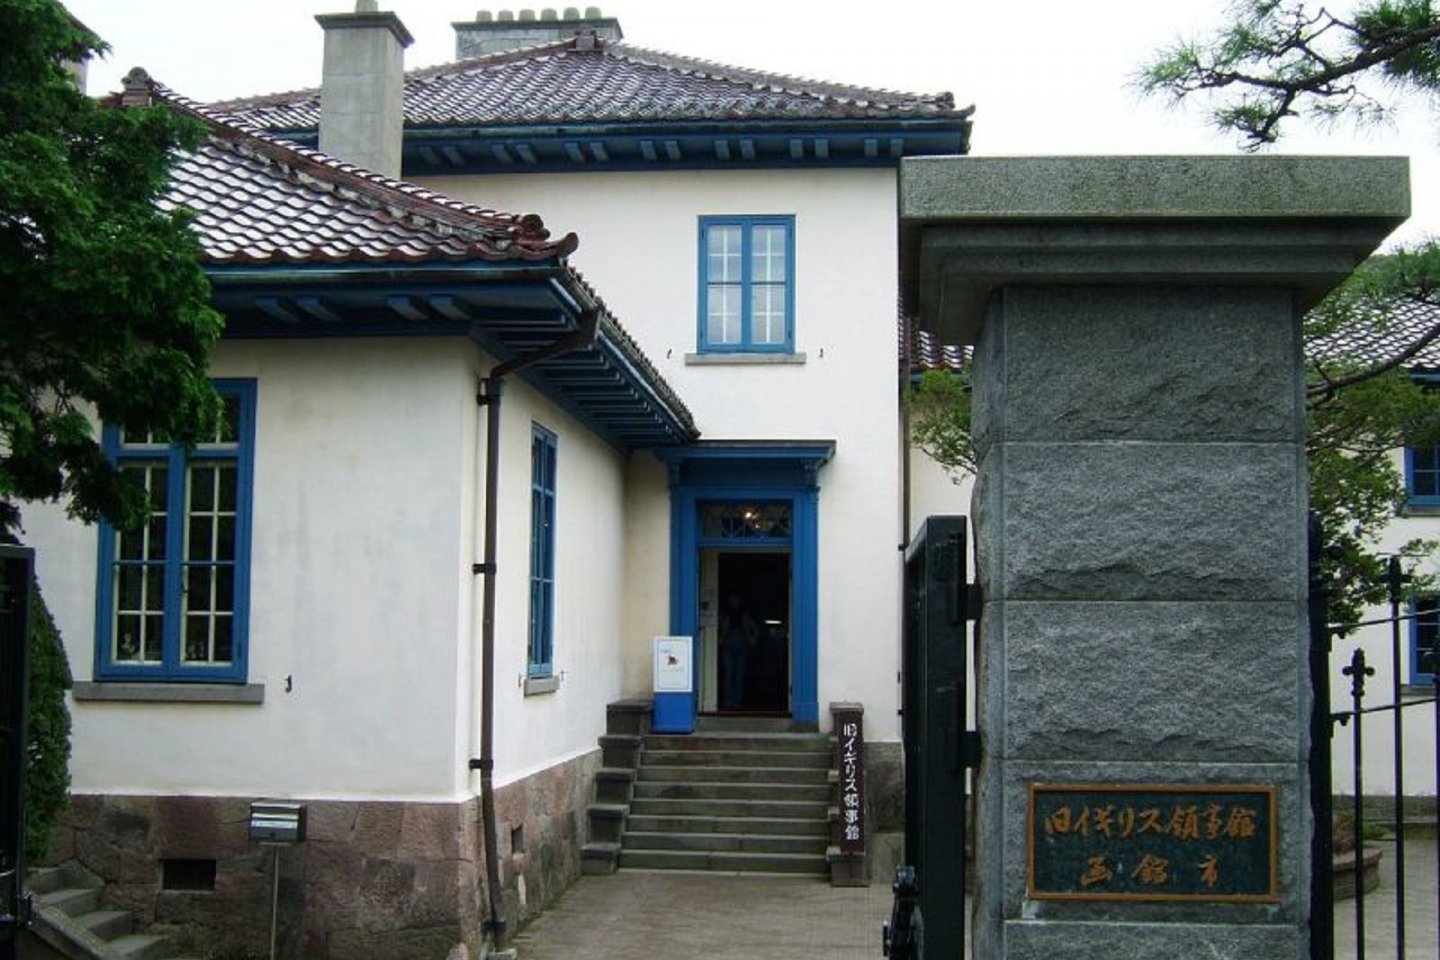 The British Consulate from 1859 to 1934 in Hakodate was designed by the Shanghai Construction Bureau of England.